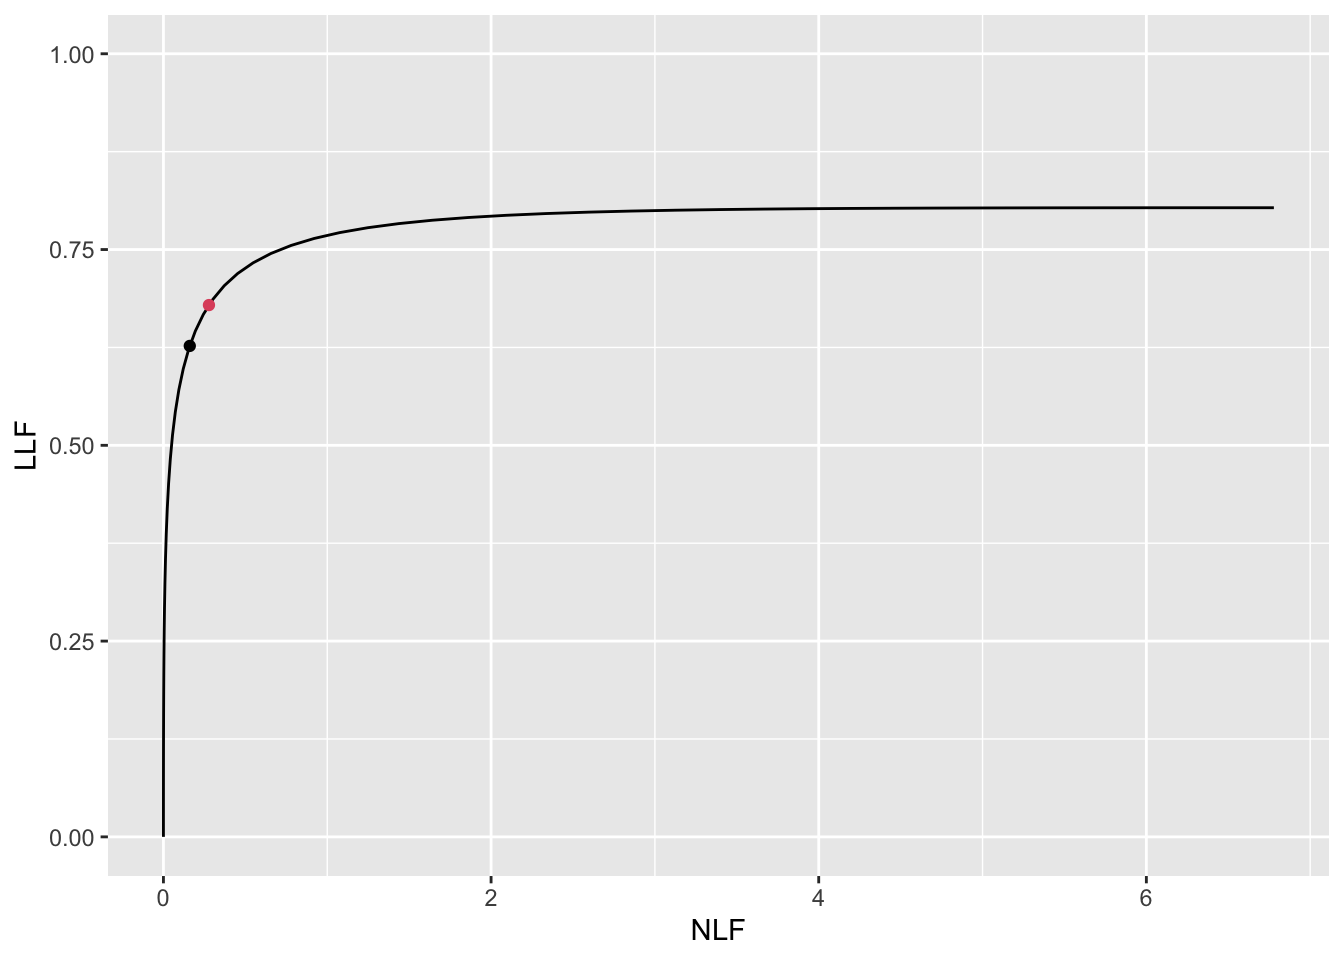 FROC plots with superposed optimal operating points. The red dot is using $\text{wAFROC}_\text{AUC}$ optimization and black dot is using Youden-index optimization.